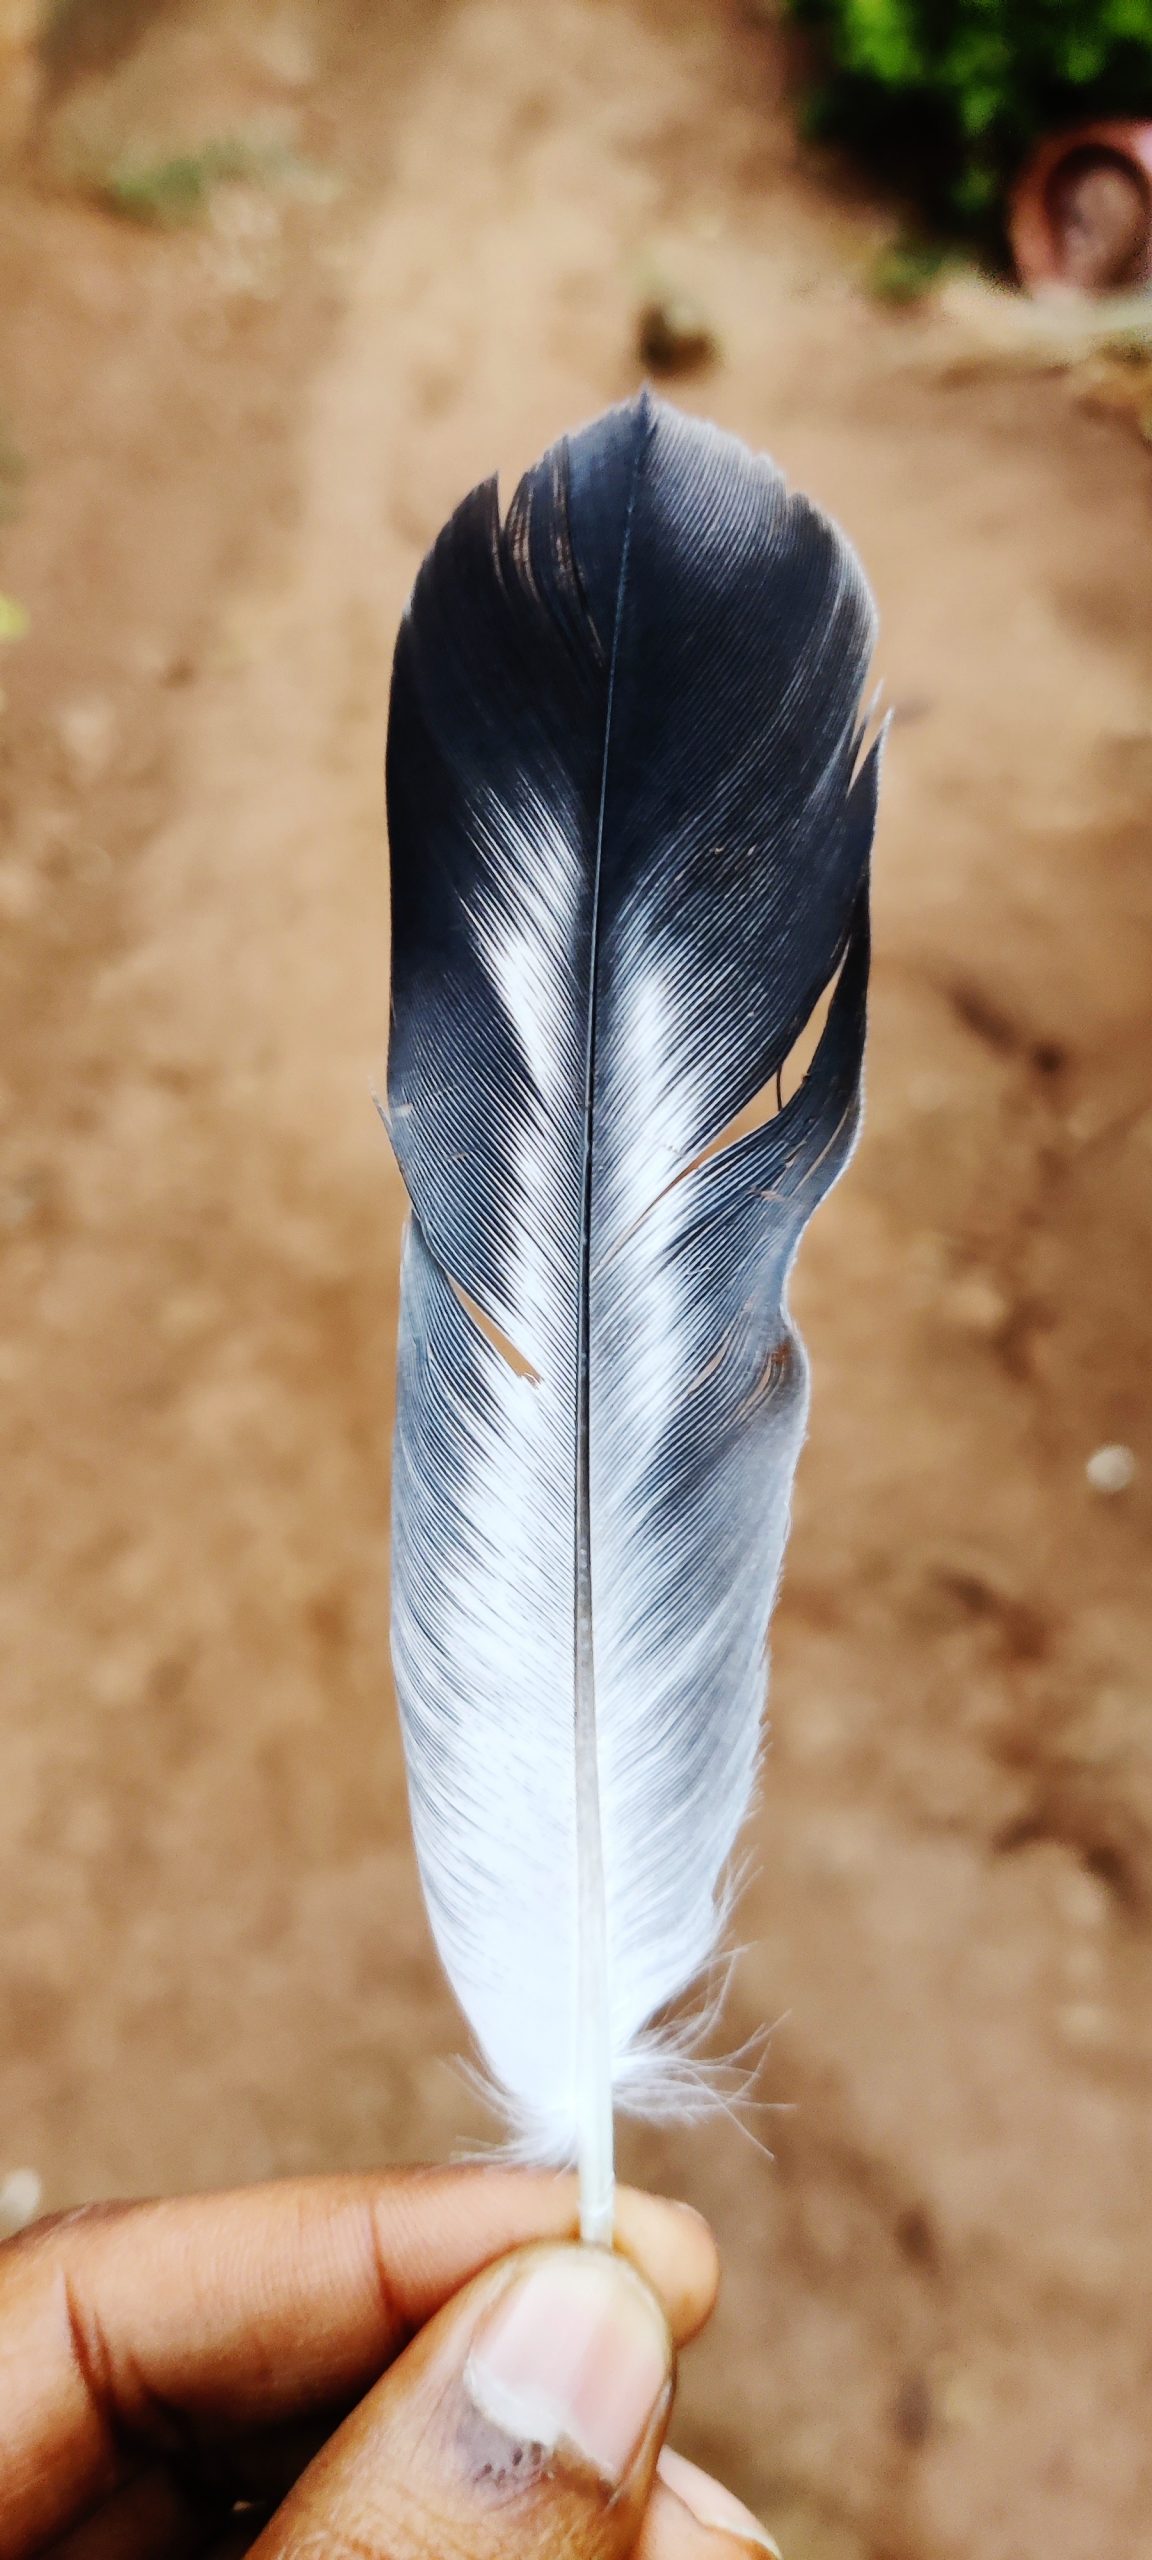 A bird's feather in hand